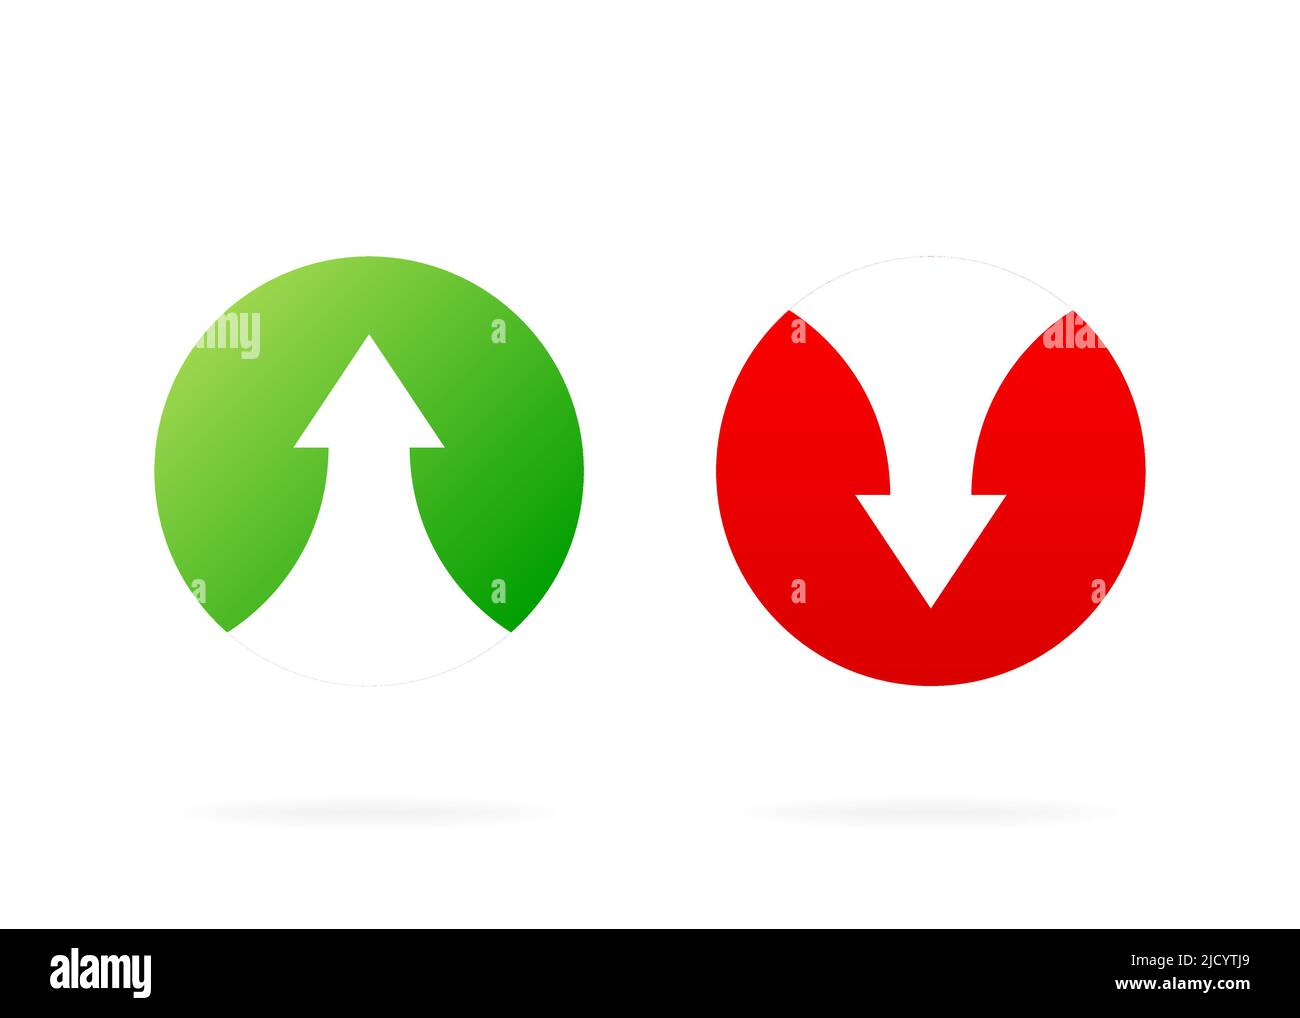 Up and down arrows. Red and Green icons. Illustration isolated on white background. Vector illustration with profit marks. Stock Vector